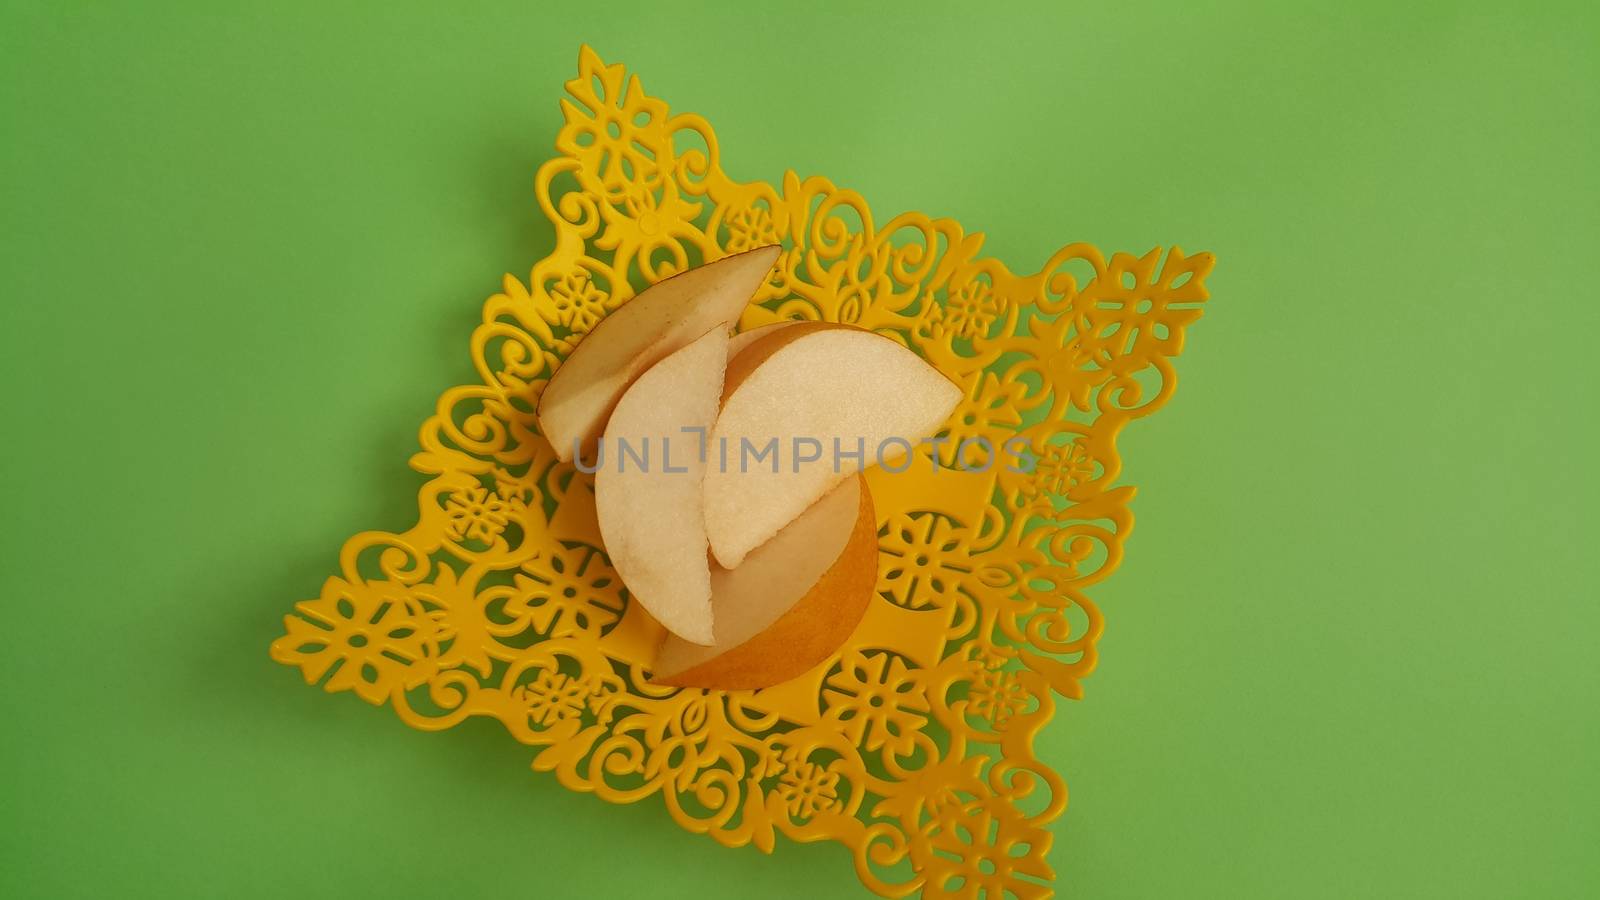 Close up view of apple slices placed in plastic yellow changair or container on a wooden floor. Fruit background for text